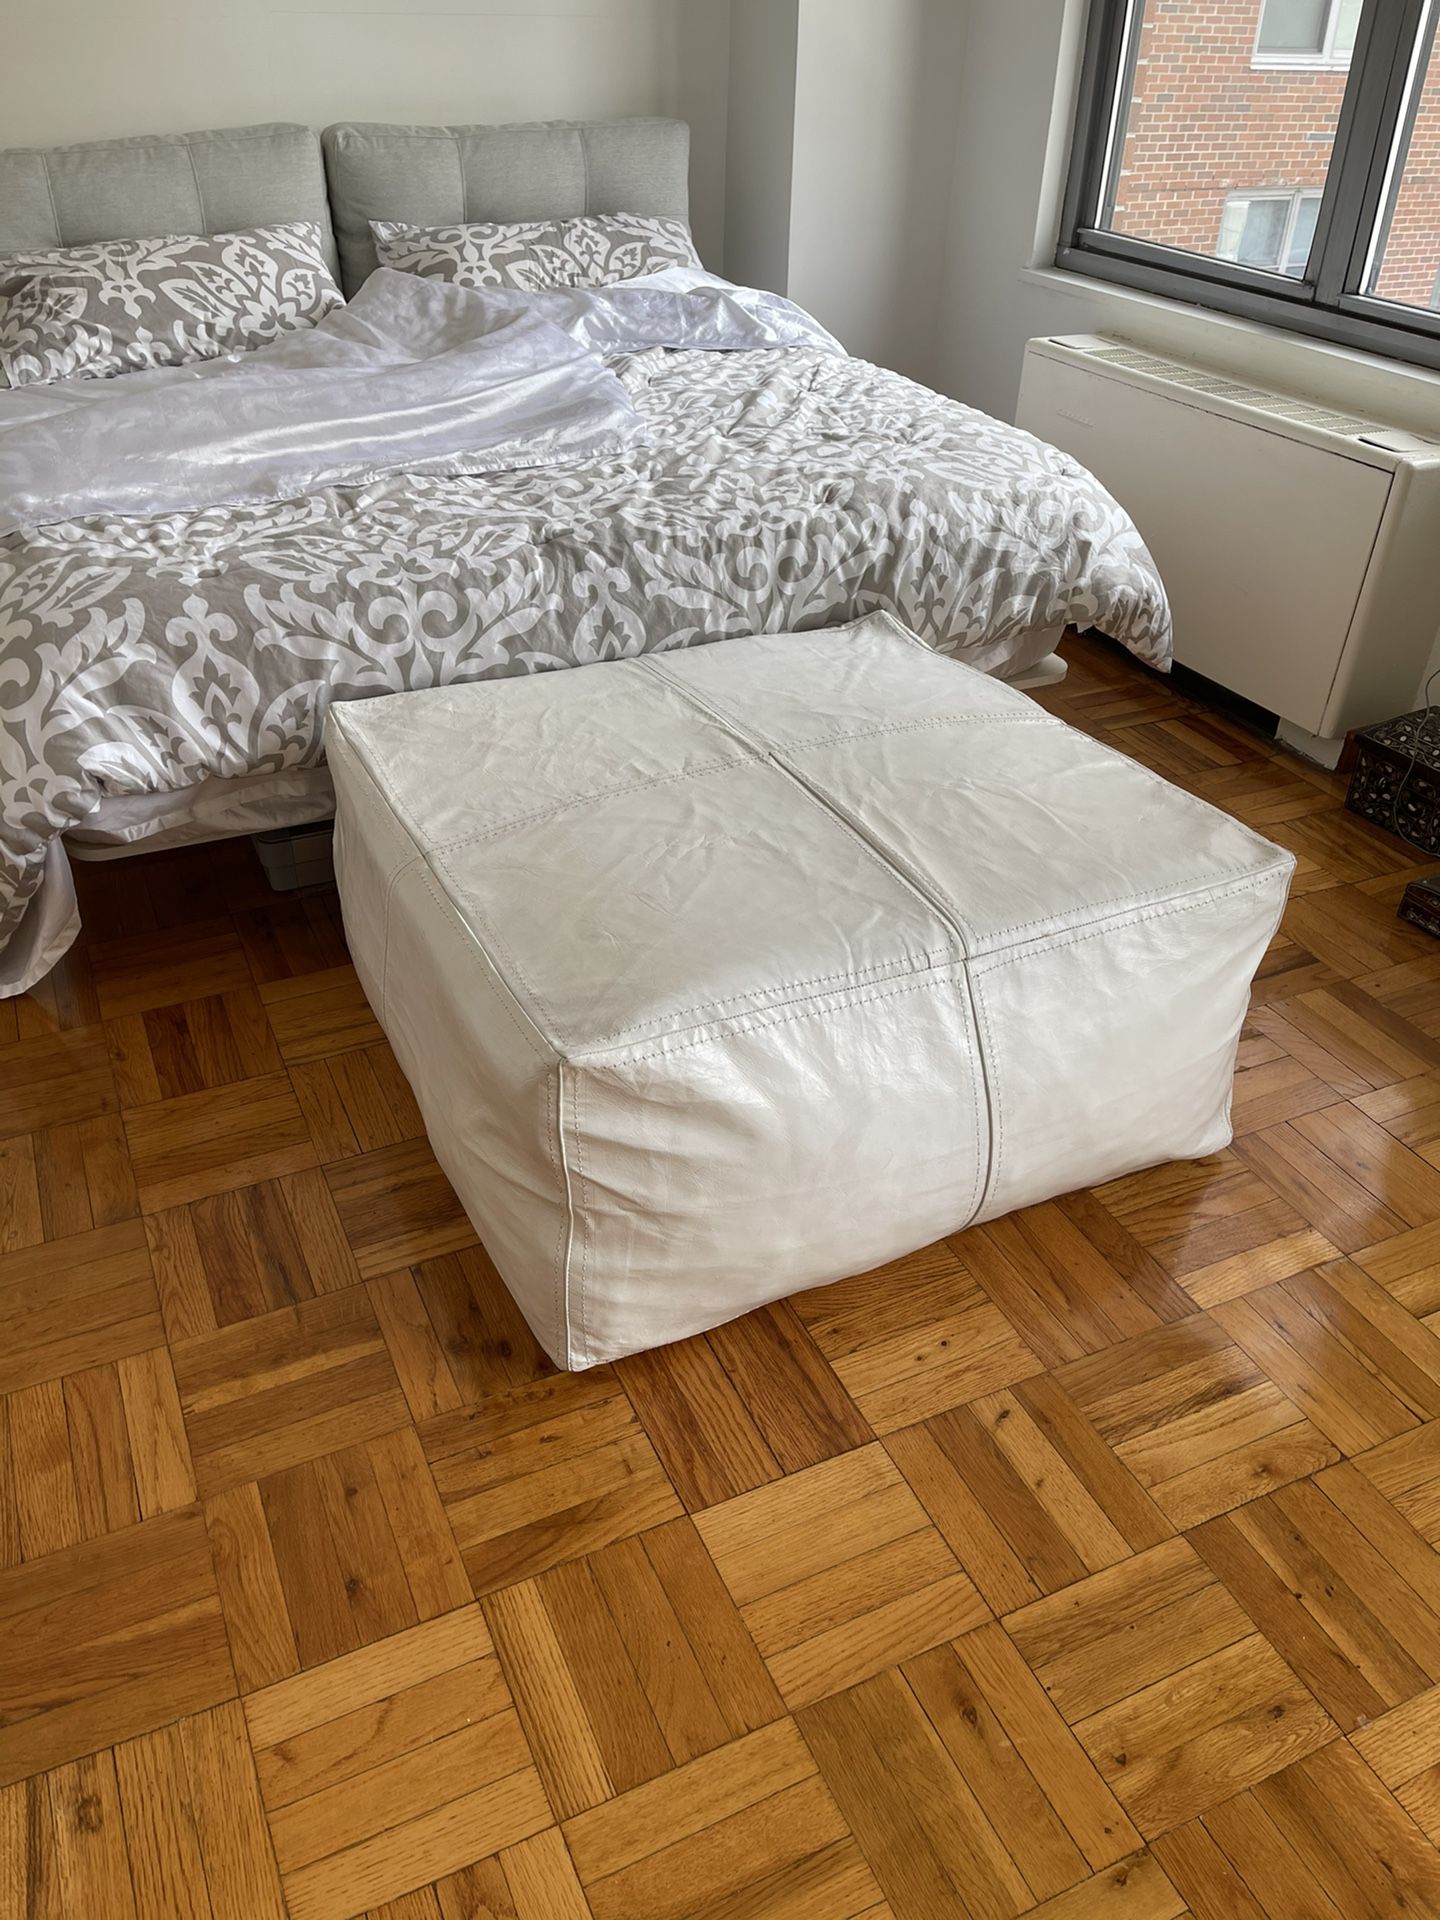 Leather Pouf Ottoman Shipped From Morocco 